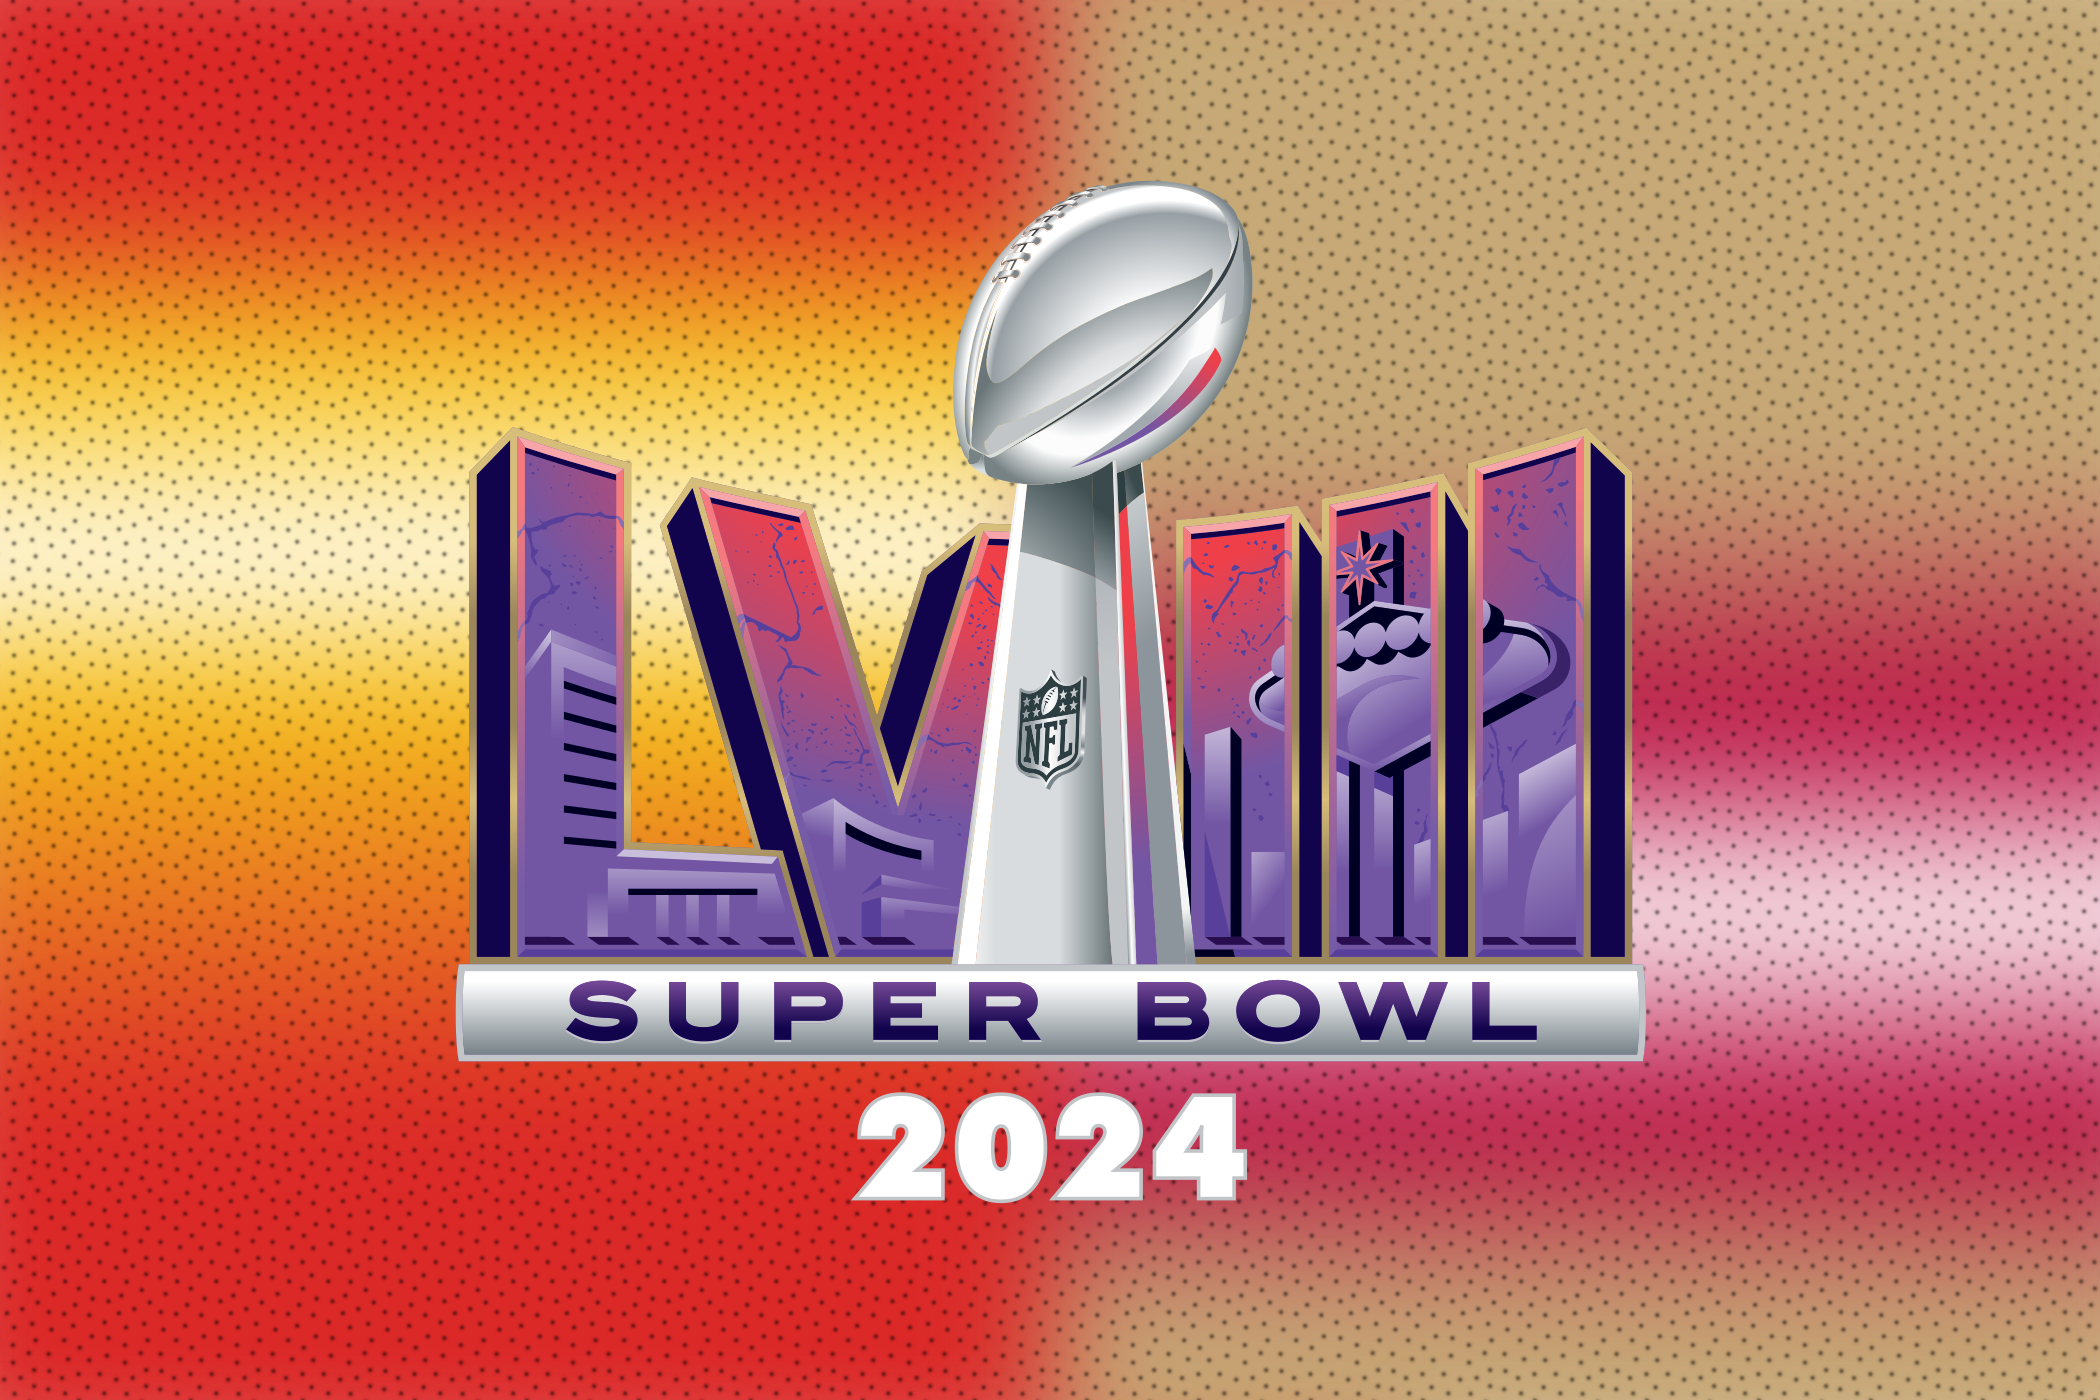 How to Buy Tickets to 2024 Super Bowl LVIII